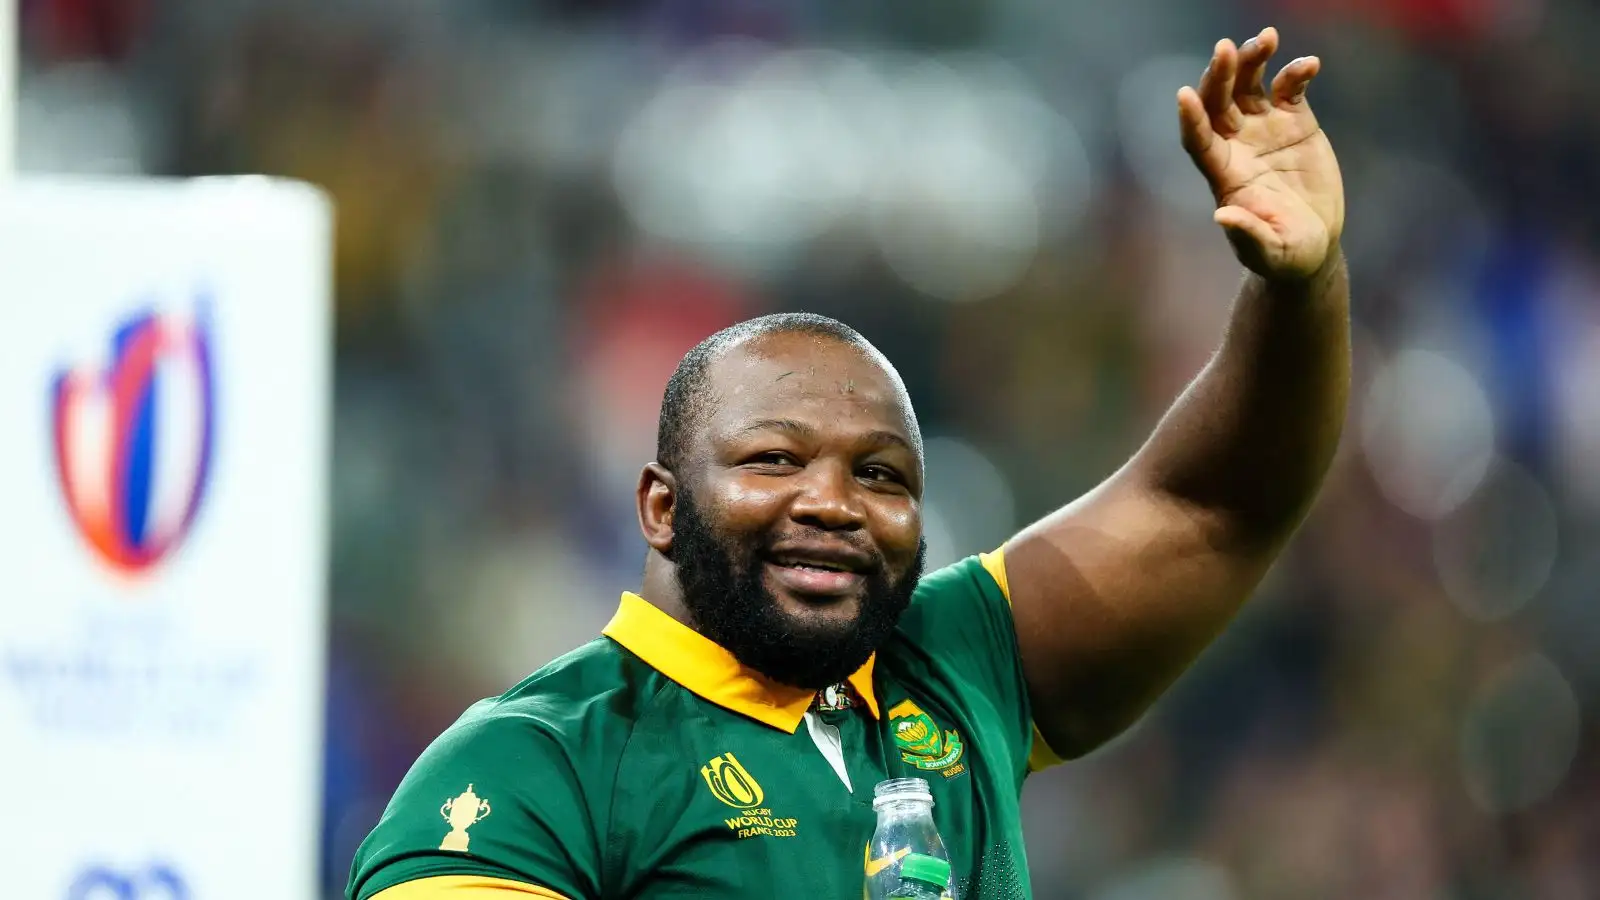 Springboks prop Ox Nche of South Africa during the Rugby World Cup